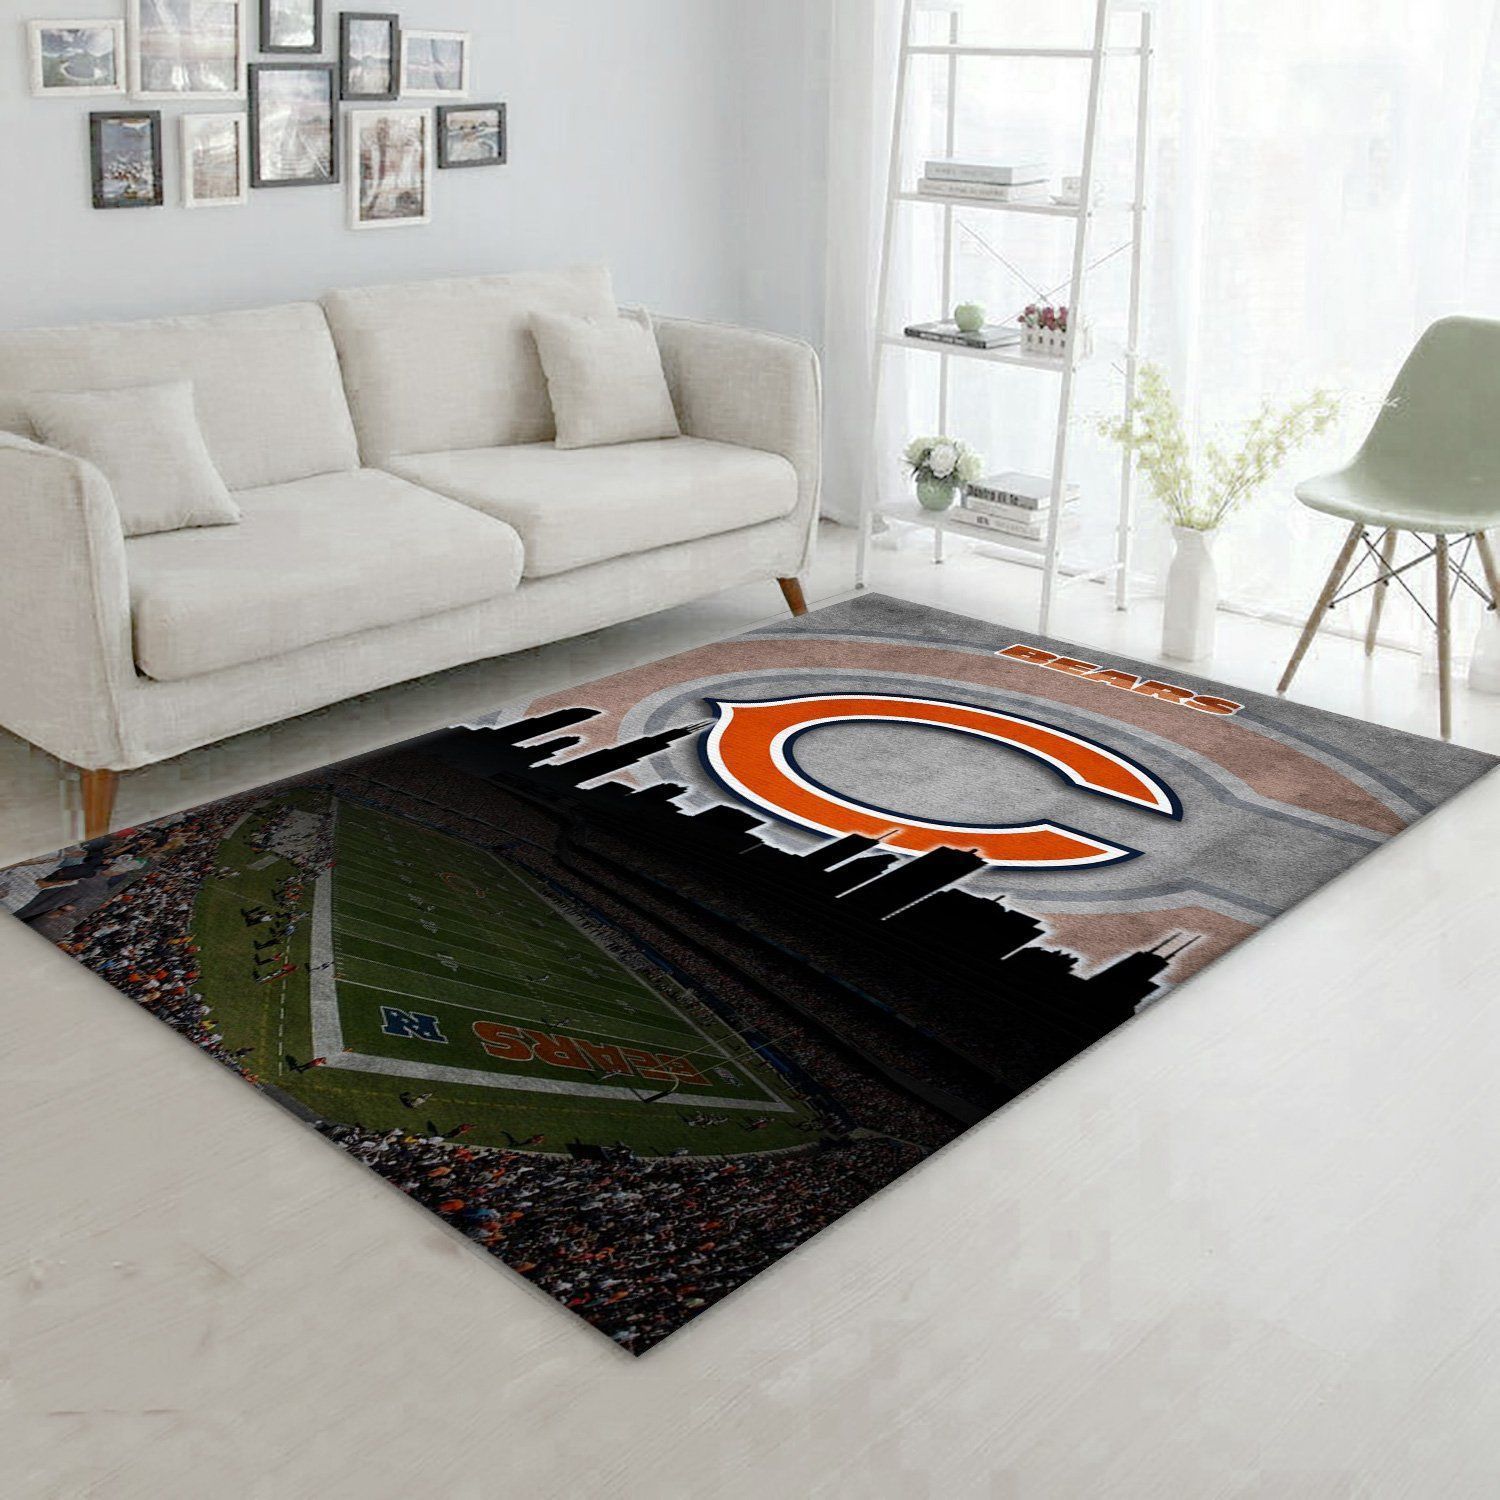 Chicago Bears NFL Rug Living Room Rug Home US Decor - Indoor Outdoor Rugs 2